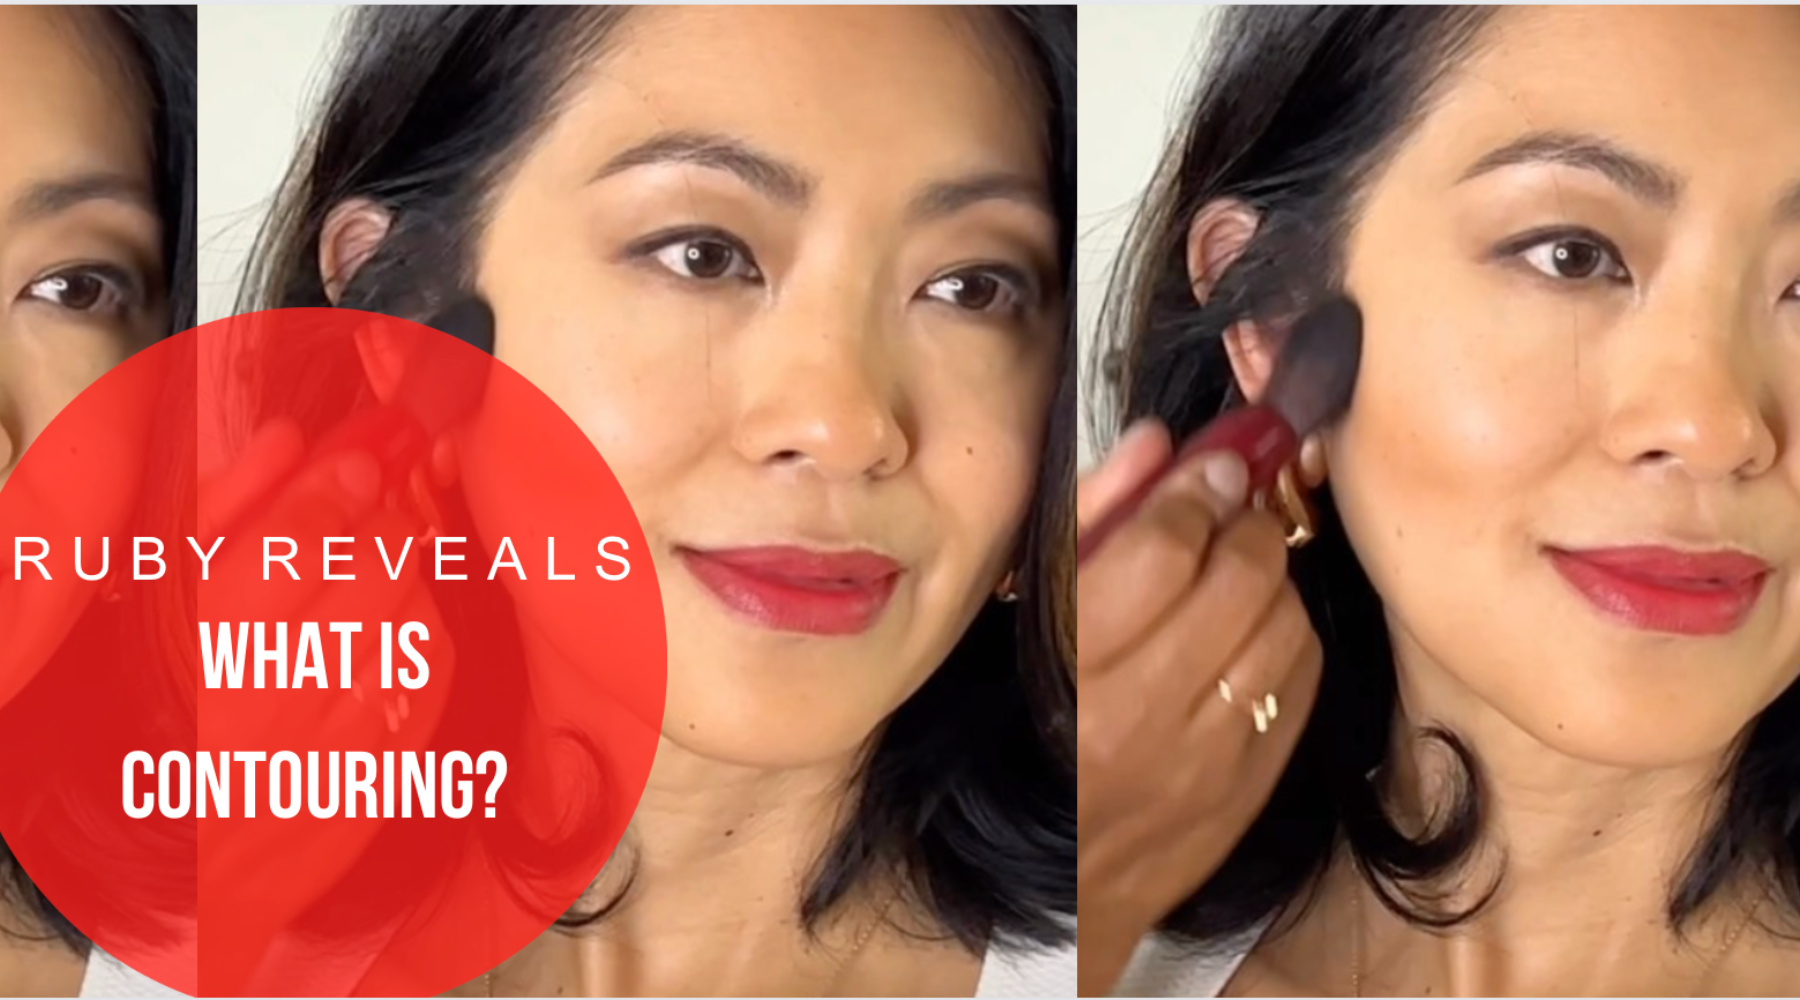 RUBY REVEALS – WHAT IS CONTOURING?